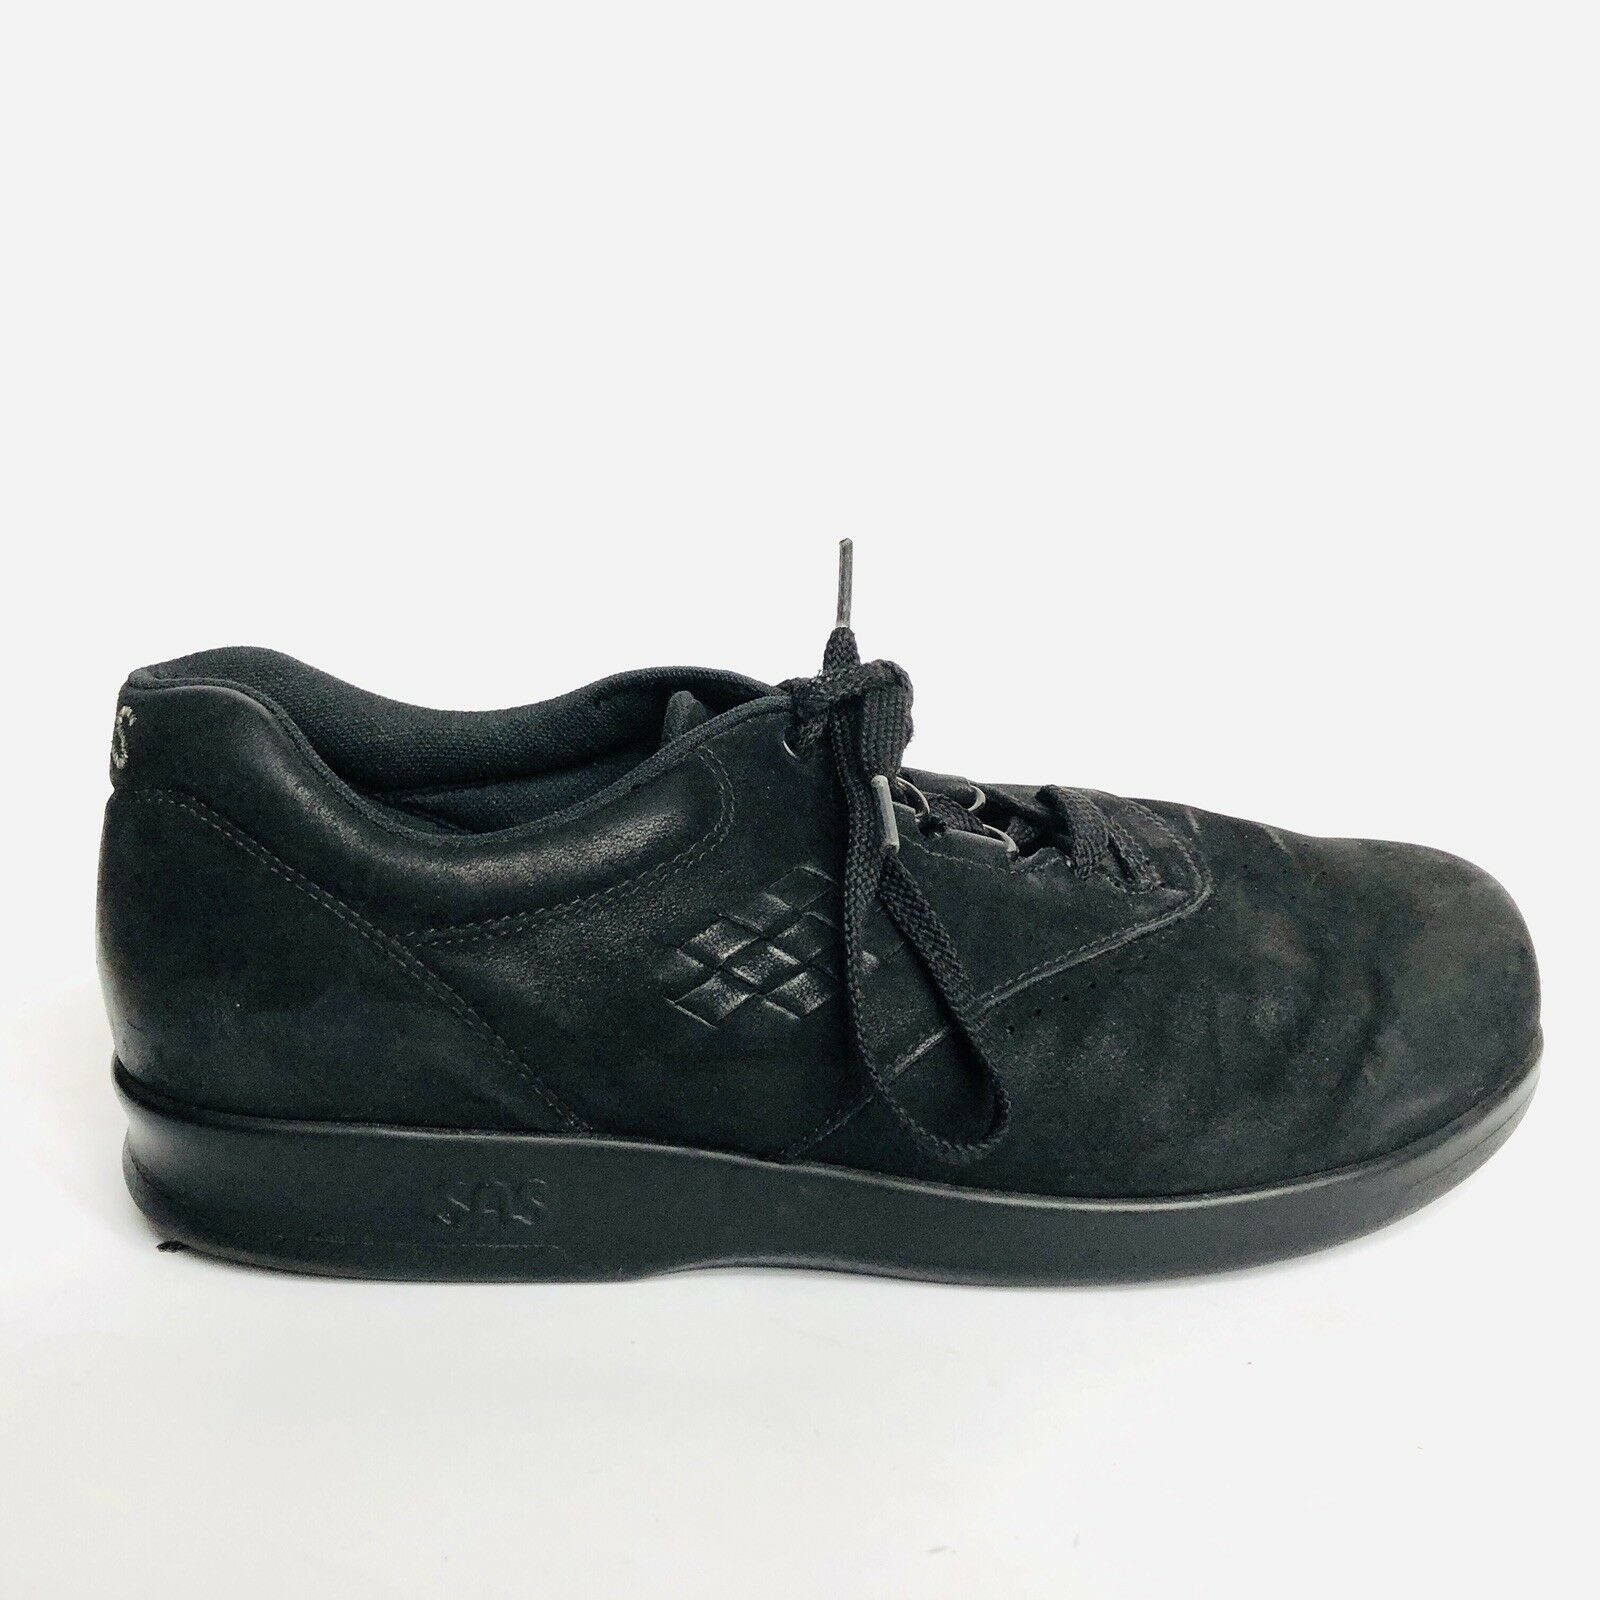 SAS Black Comfort Lace-up Walking Shoes With No Inserts Women’s Size 8 W